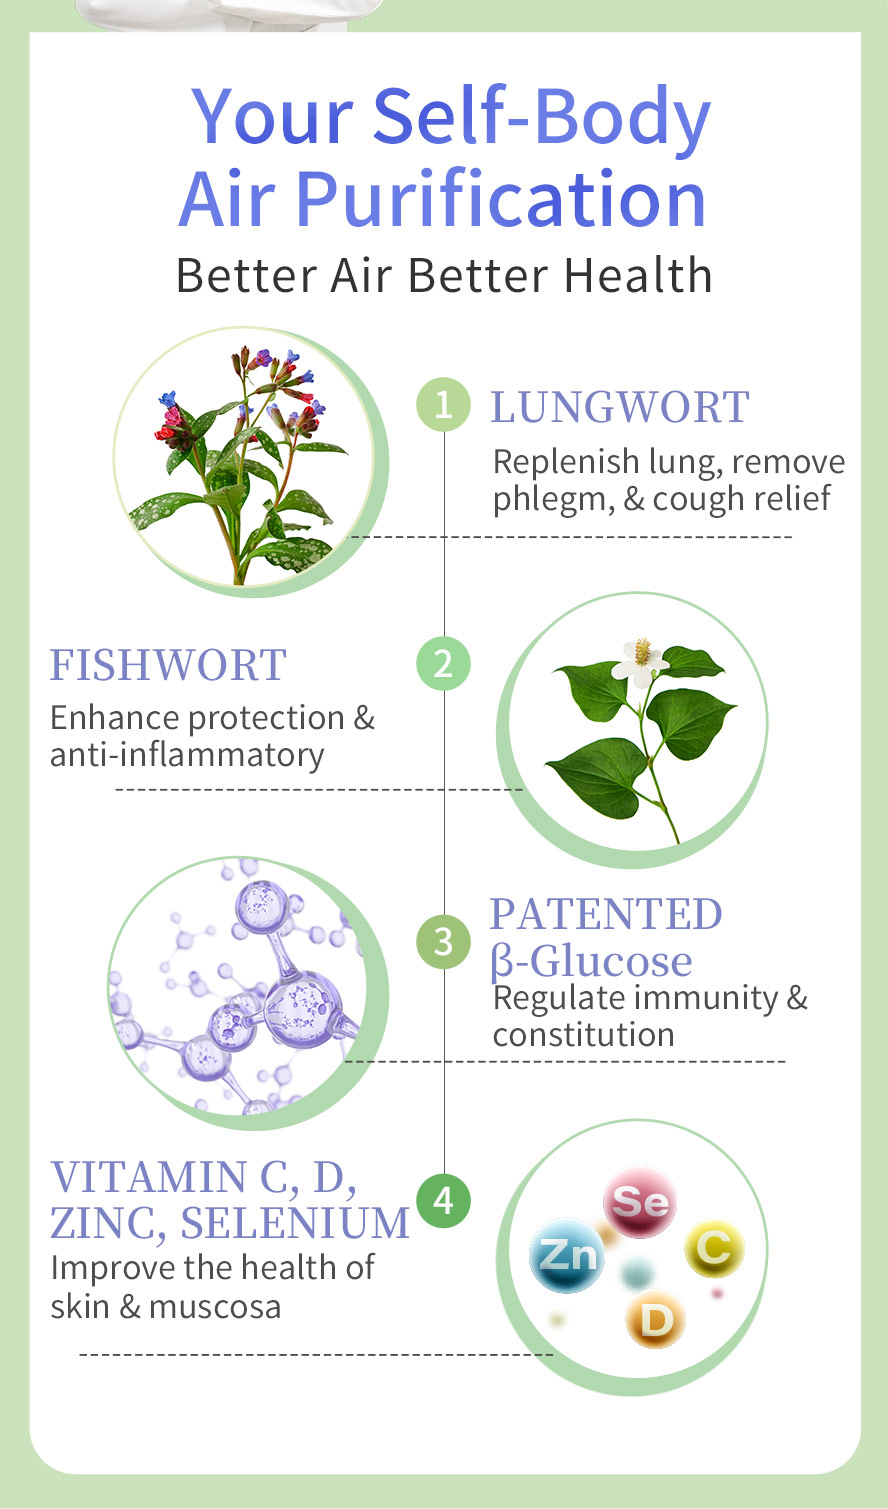 BHK's Lungwort Extract contains patented glucose, vitamins and minerals to enhance respiratory immunity, replenish lung, and cough relief.